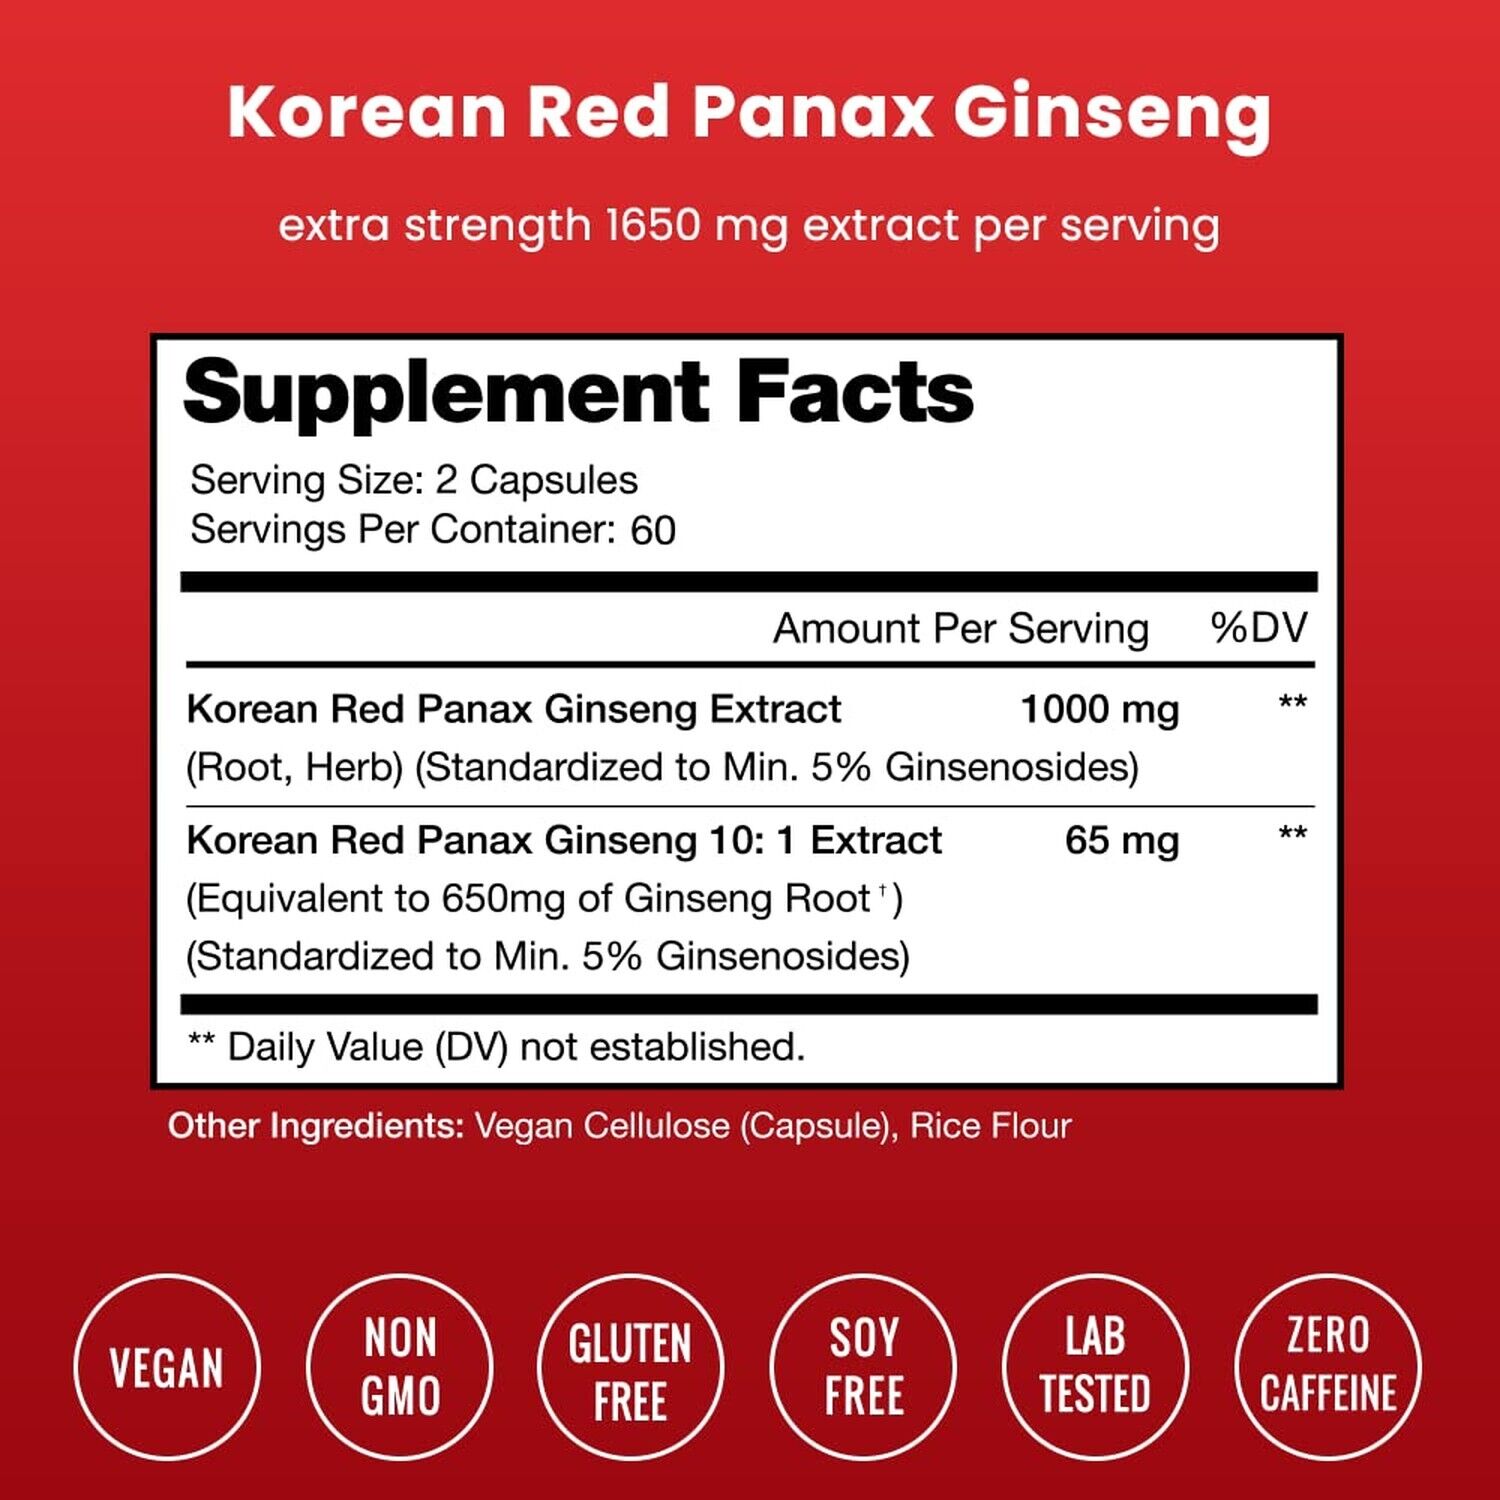 120 Vegan Capsules of NutraChamps Red Ginseng